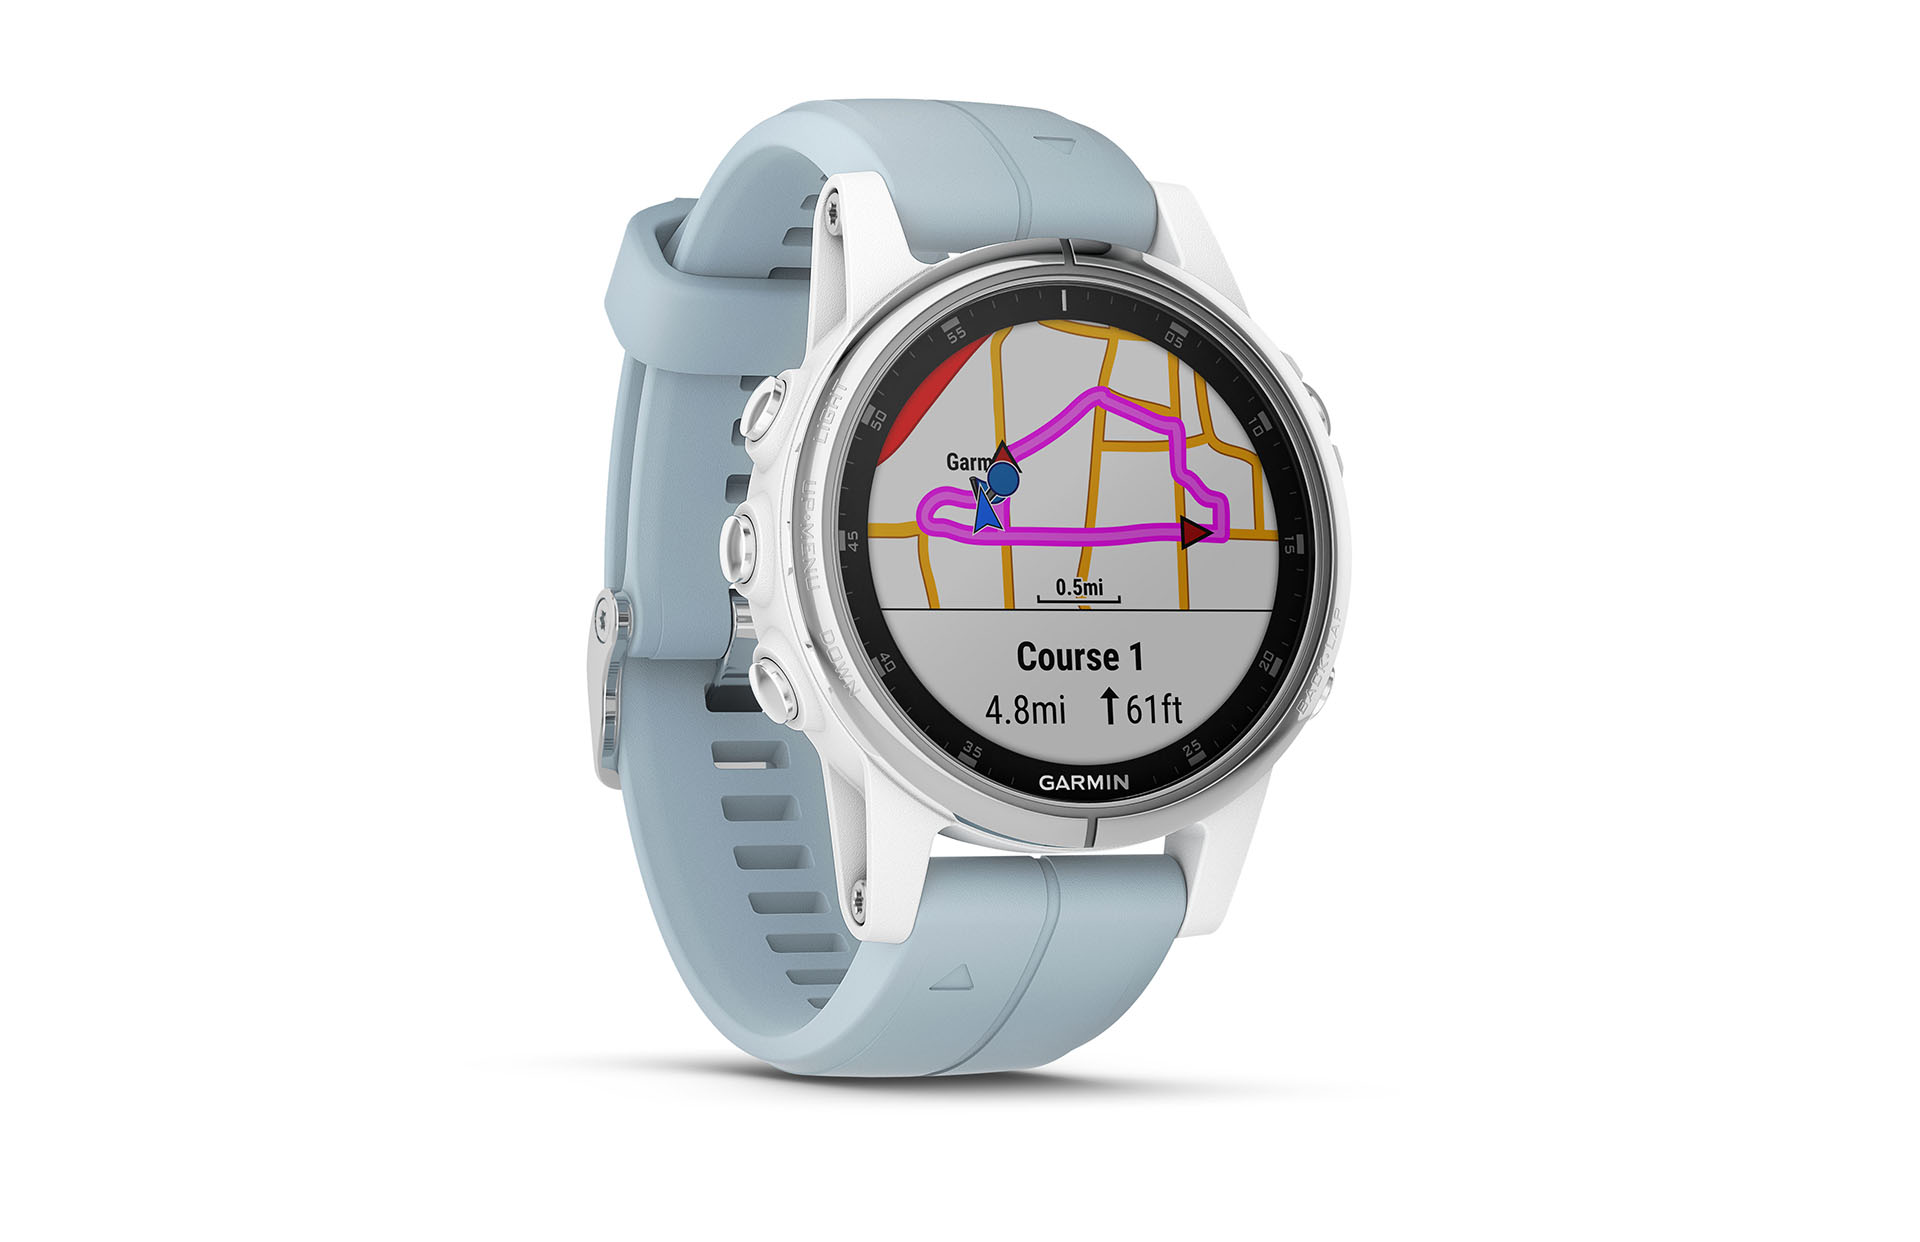 Garmin brings music, NFC payments, onboard mapping to Fenix 5 Plus watches